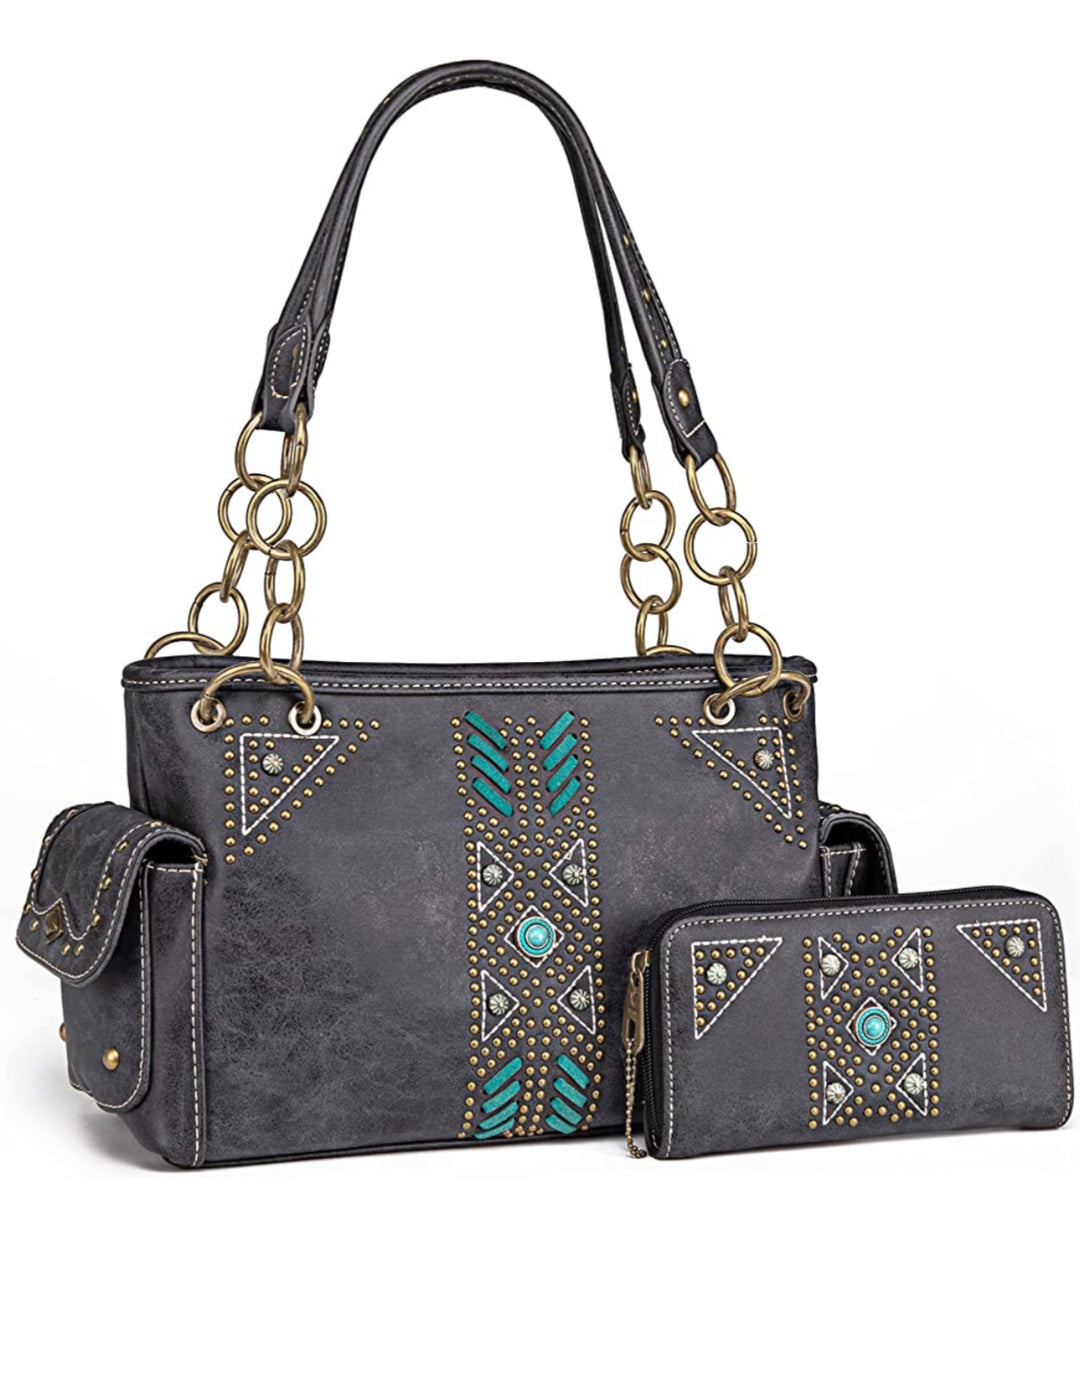 Concealed Carry Tote Bag for Women Leather Embroidered Western Design Satchel with Wallets Set